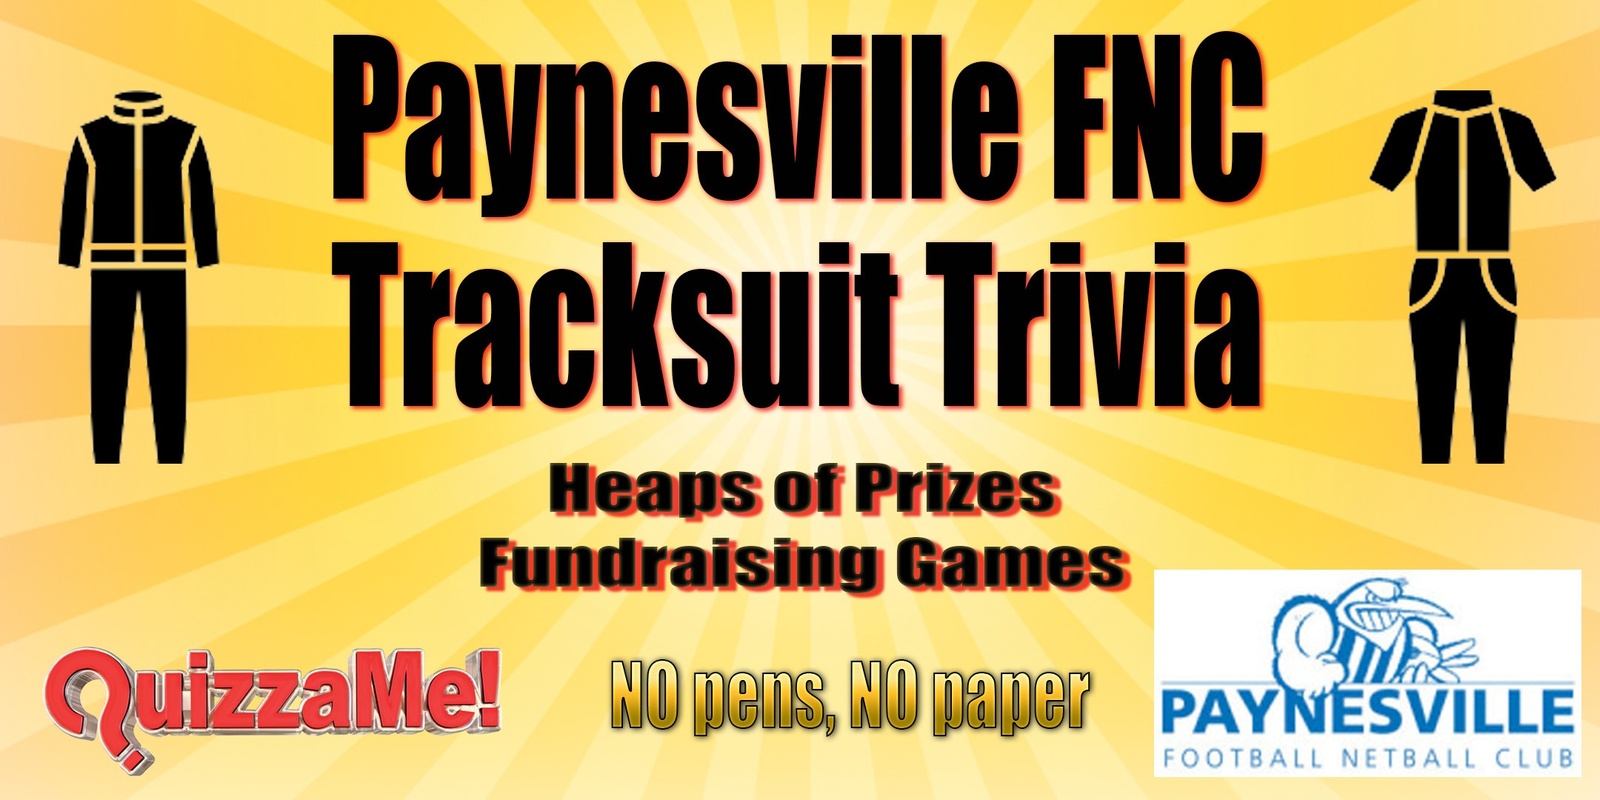 Banner image for Paynesville Football Netball Club - Tracksuit Trivia